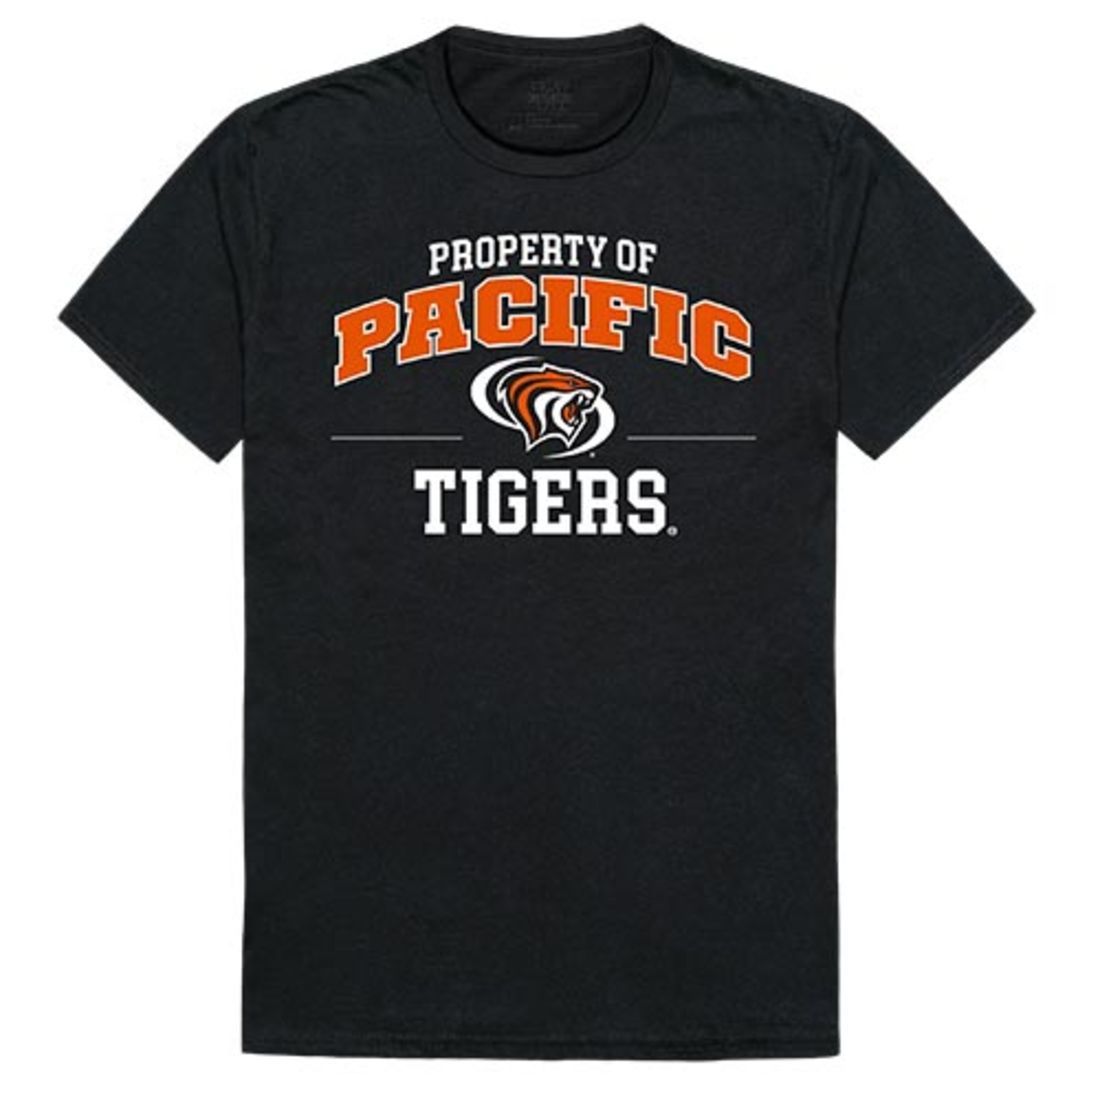 University of the Pacific Tigers Property T-Shirt Black-Campus-Wardrobe